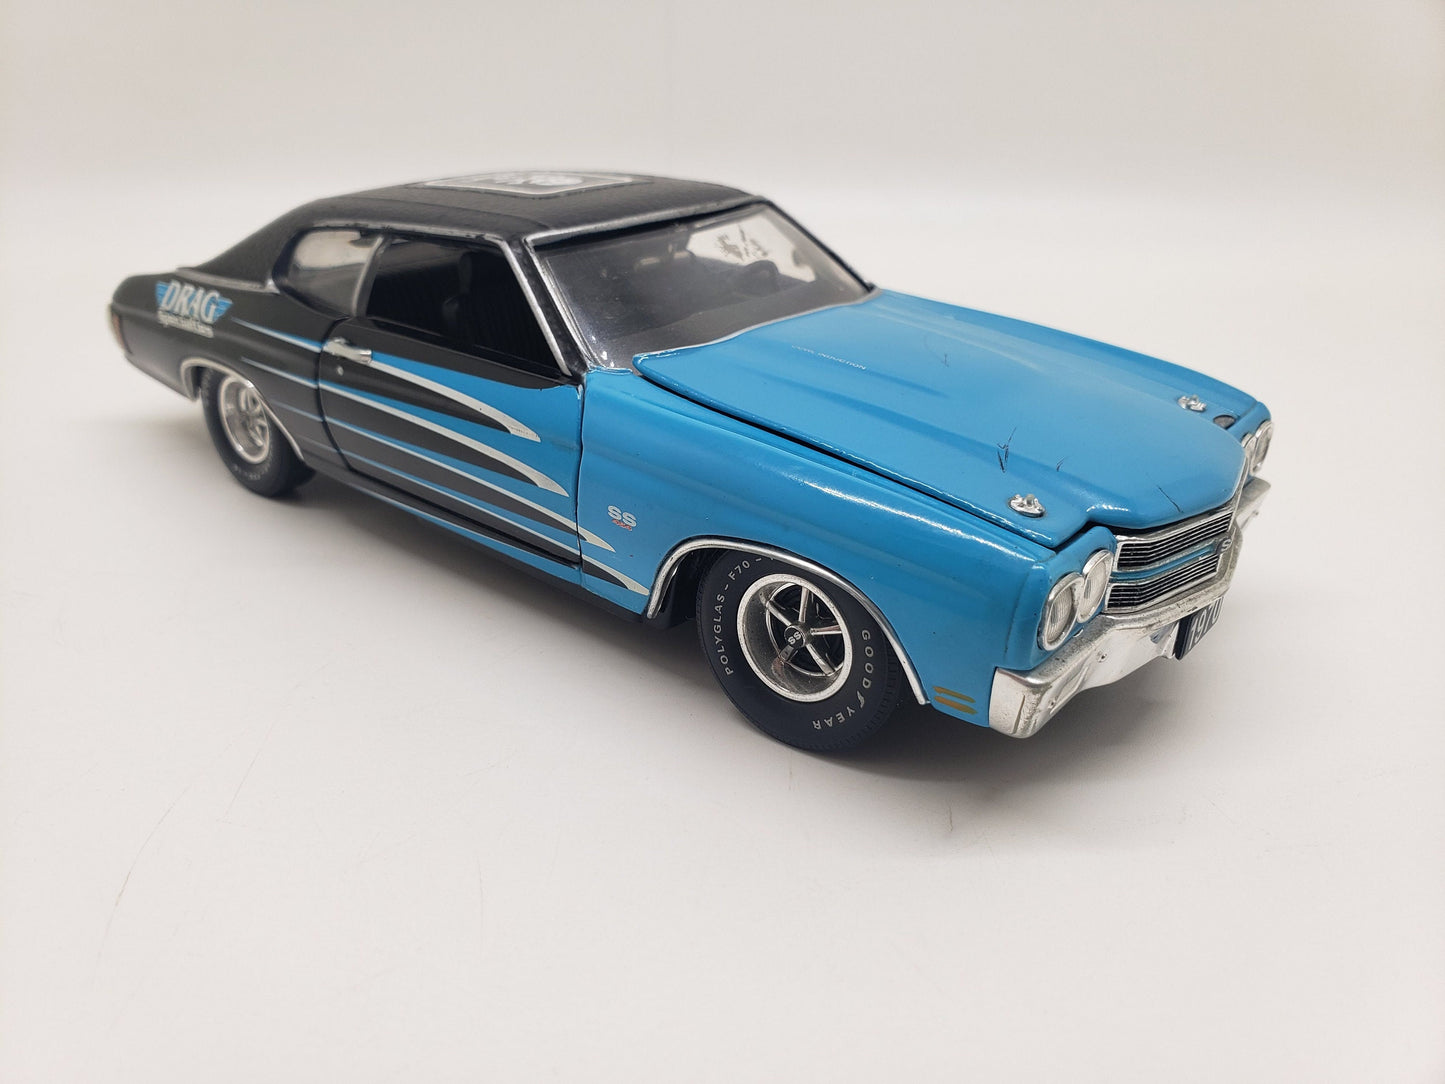 Crown Premiums 1970 Chevelle SS 454 Blue Vintage Collectible Replica Scale Model Metal Car Perfect Birthday Gift